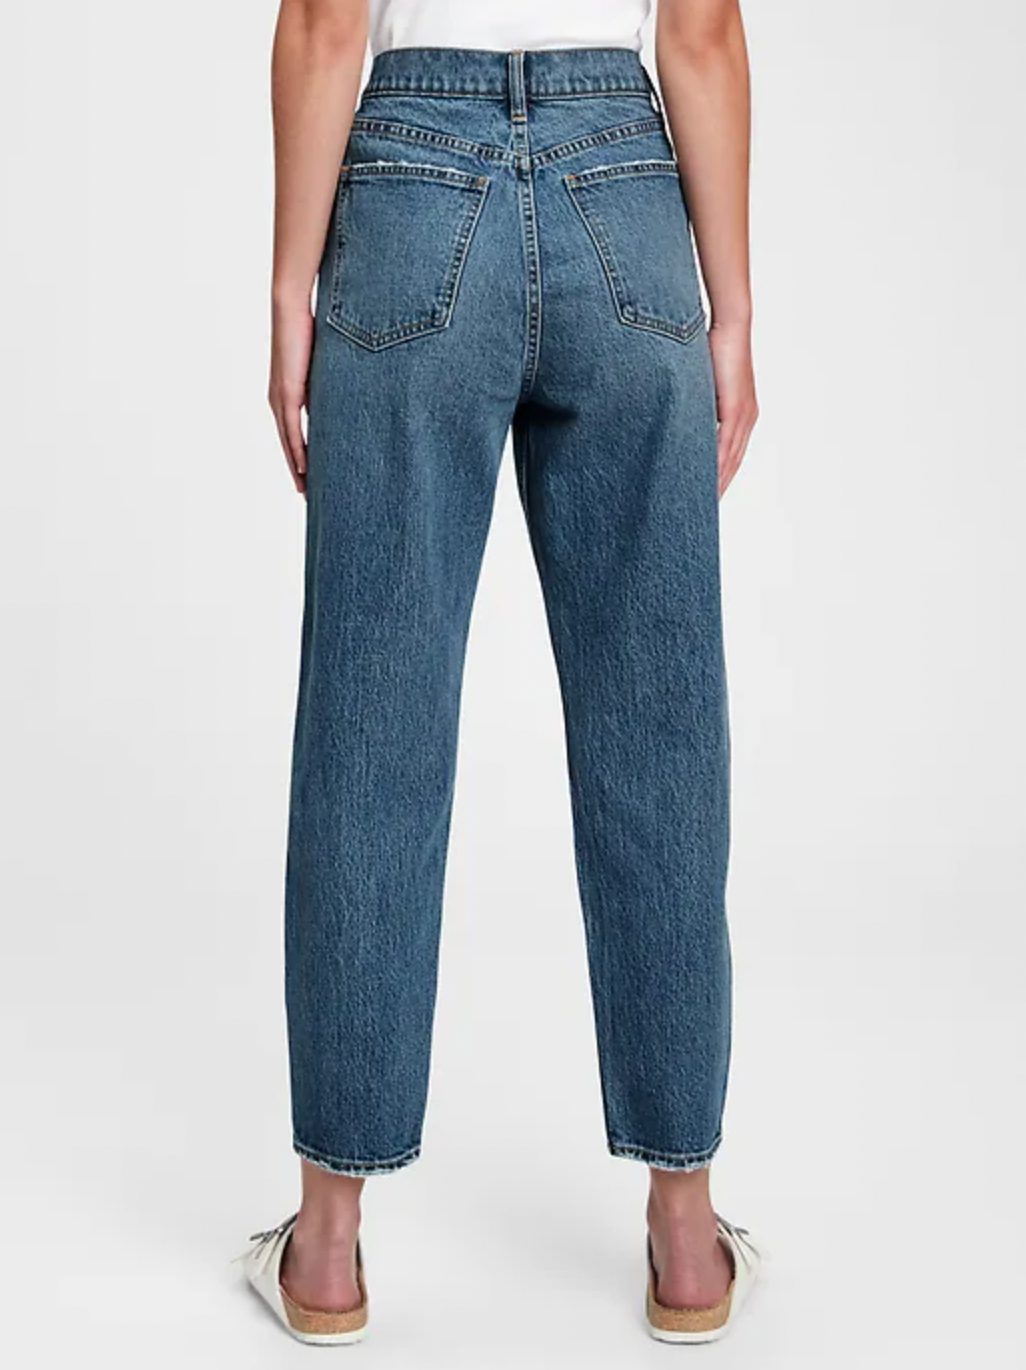 Gap Sky High True Skinny Ankle Jeans With Secret Smoothing Pockets